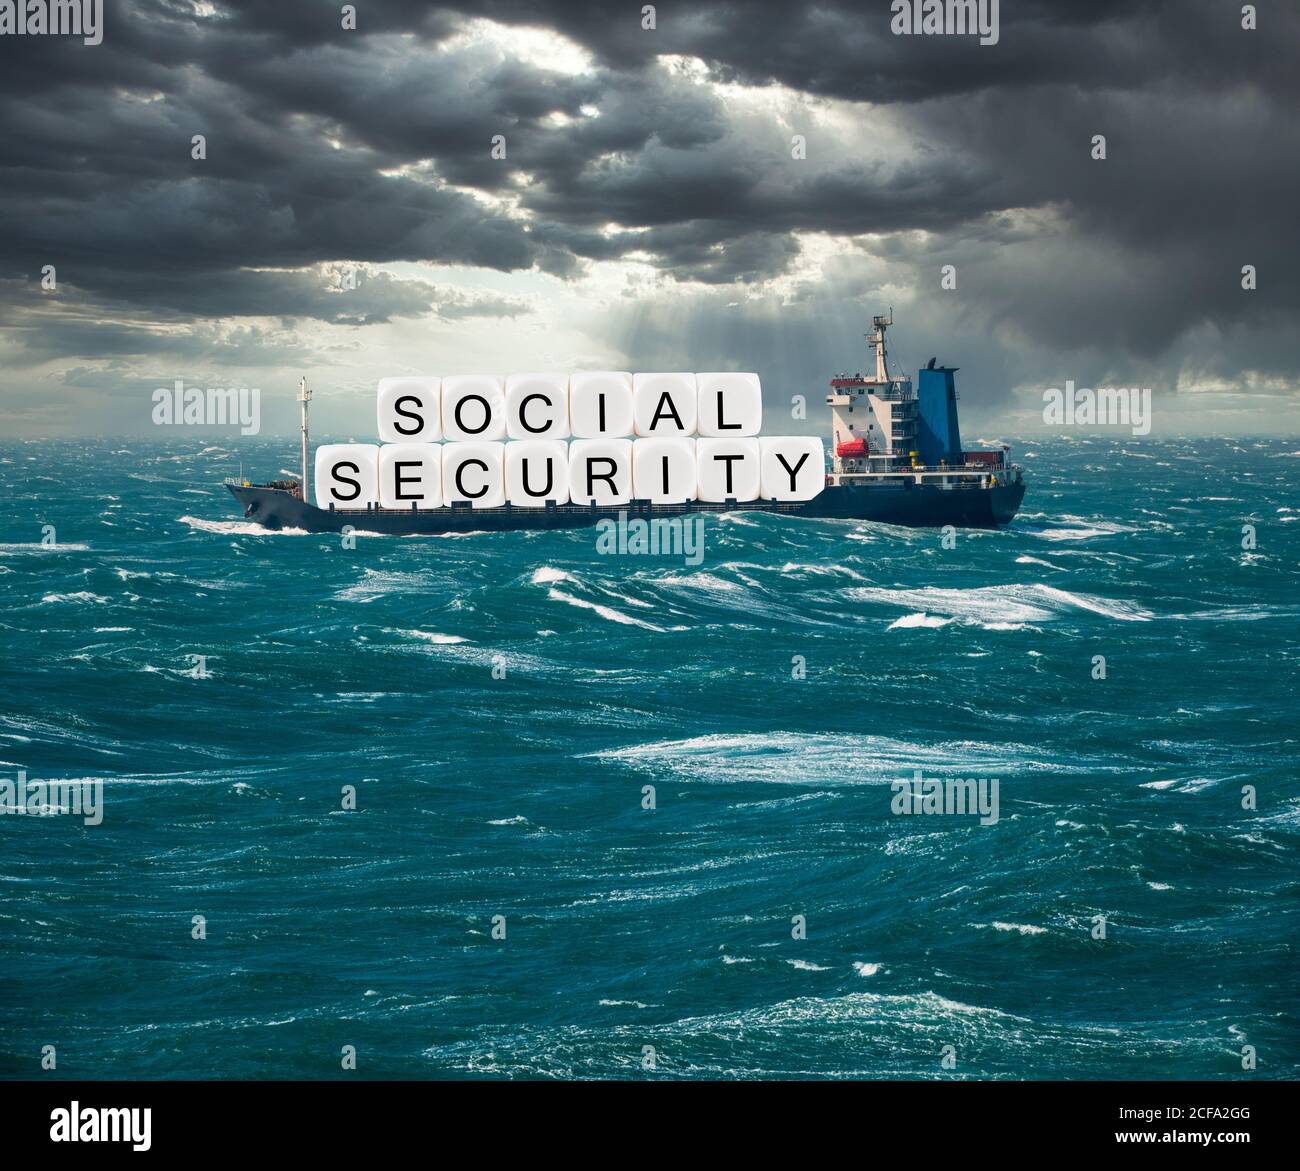 Social Security letters carried on freight ship in stormy seas as concept for issues around funding of USA pensions to seniors Stock Photo